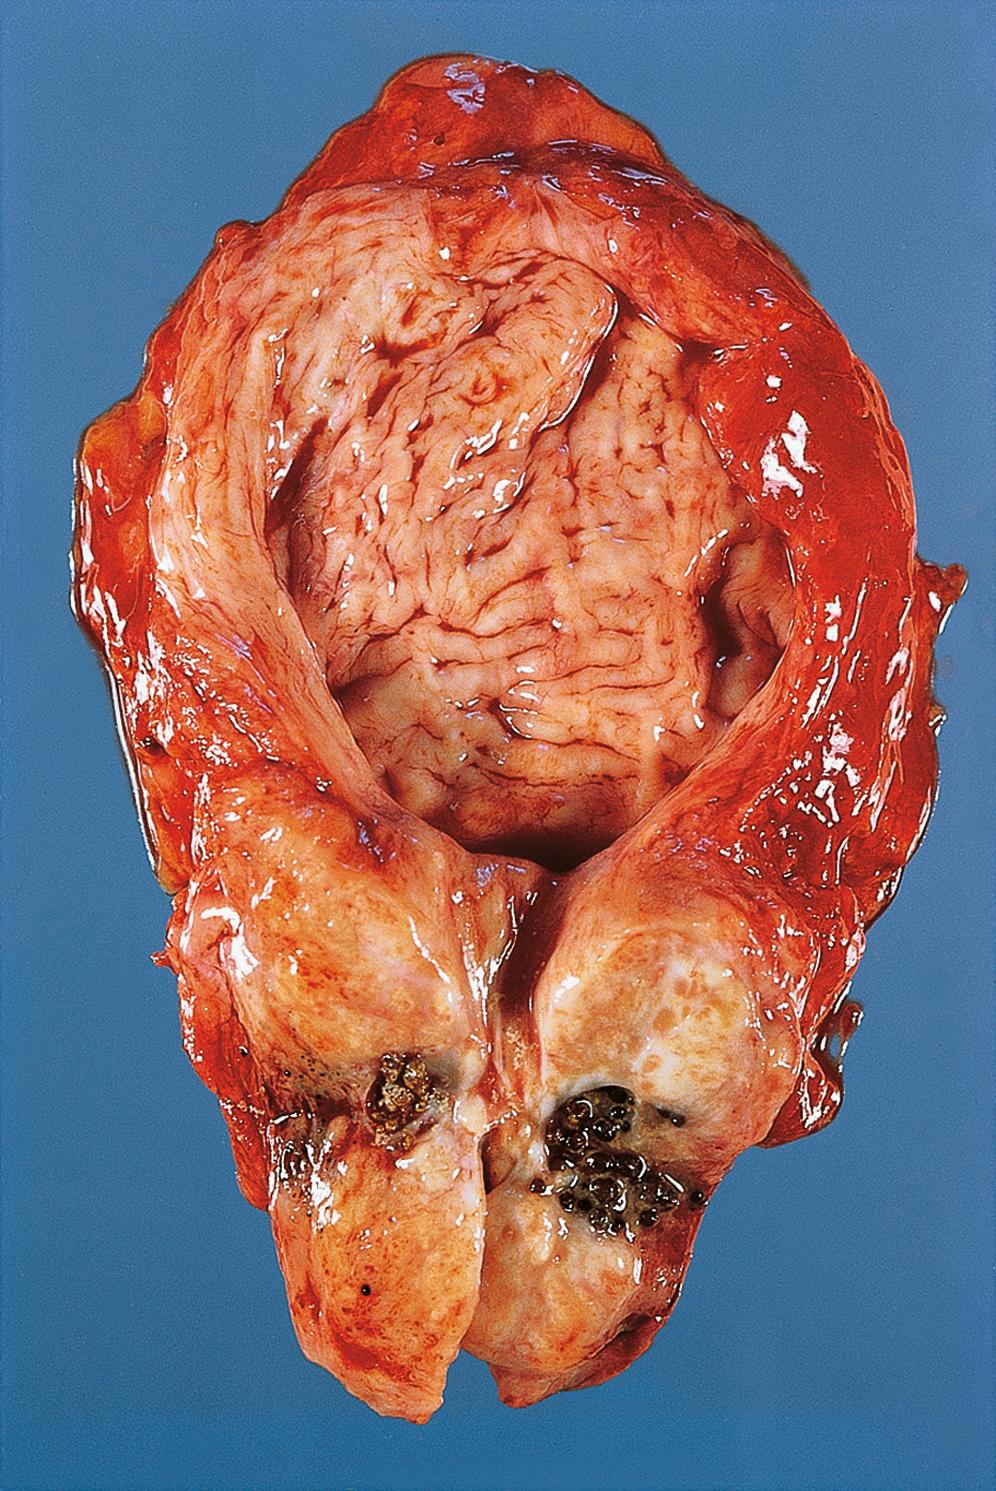 E-Fig. 19.6 G, Benign prostatic hypertrophy (BPH). The prostate is enlarged due to nodular hyperplasia of both the glands and stroma, usually within the periurethral zone. This results in urinary outflow obstruction and urine retention within the bladder. As a result, the bladder wall becomes thickened due to detrusor muscle hypertrophy and the lining of the bladder becomes trabeculated.